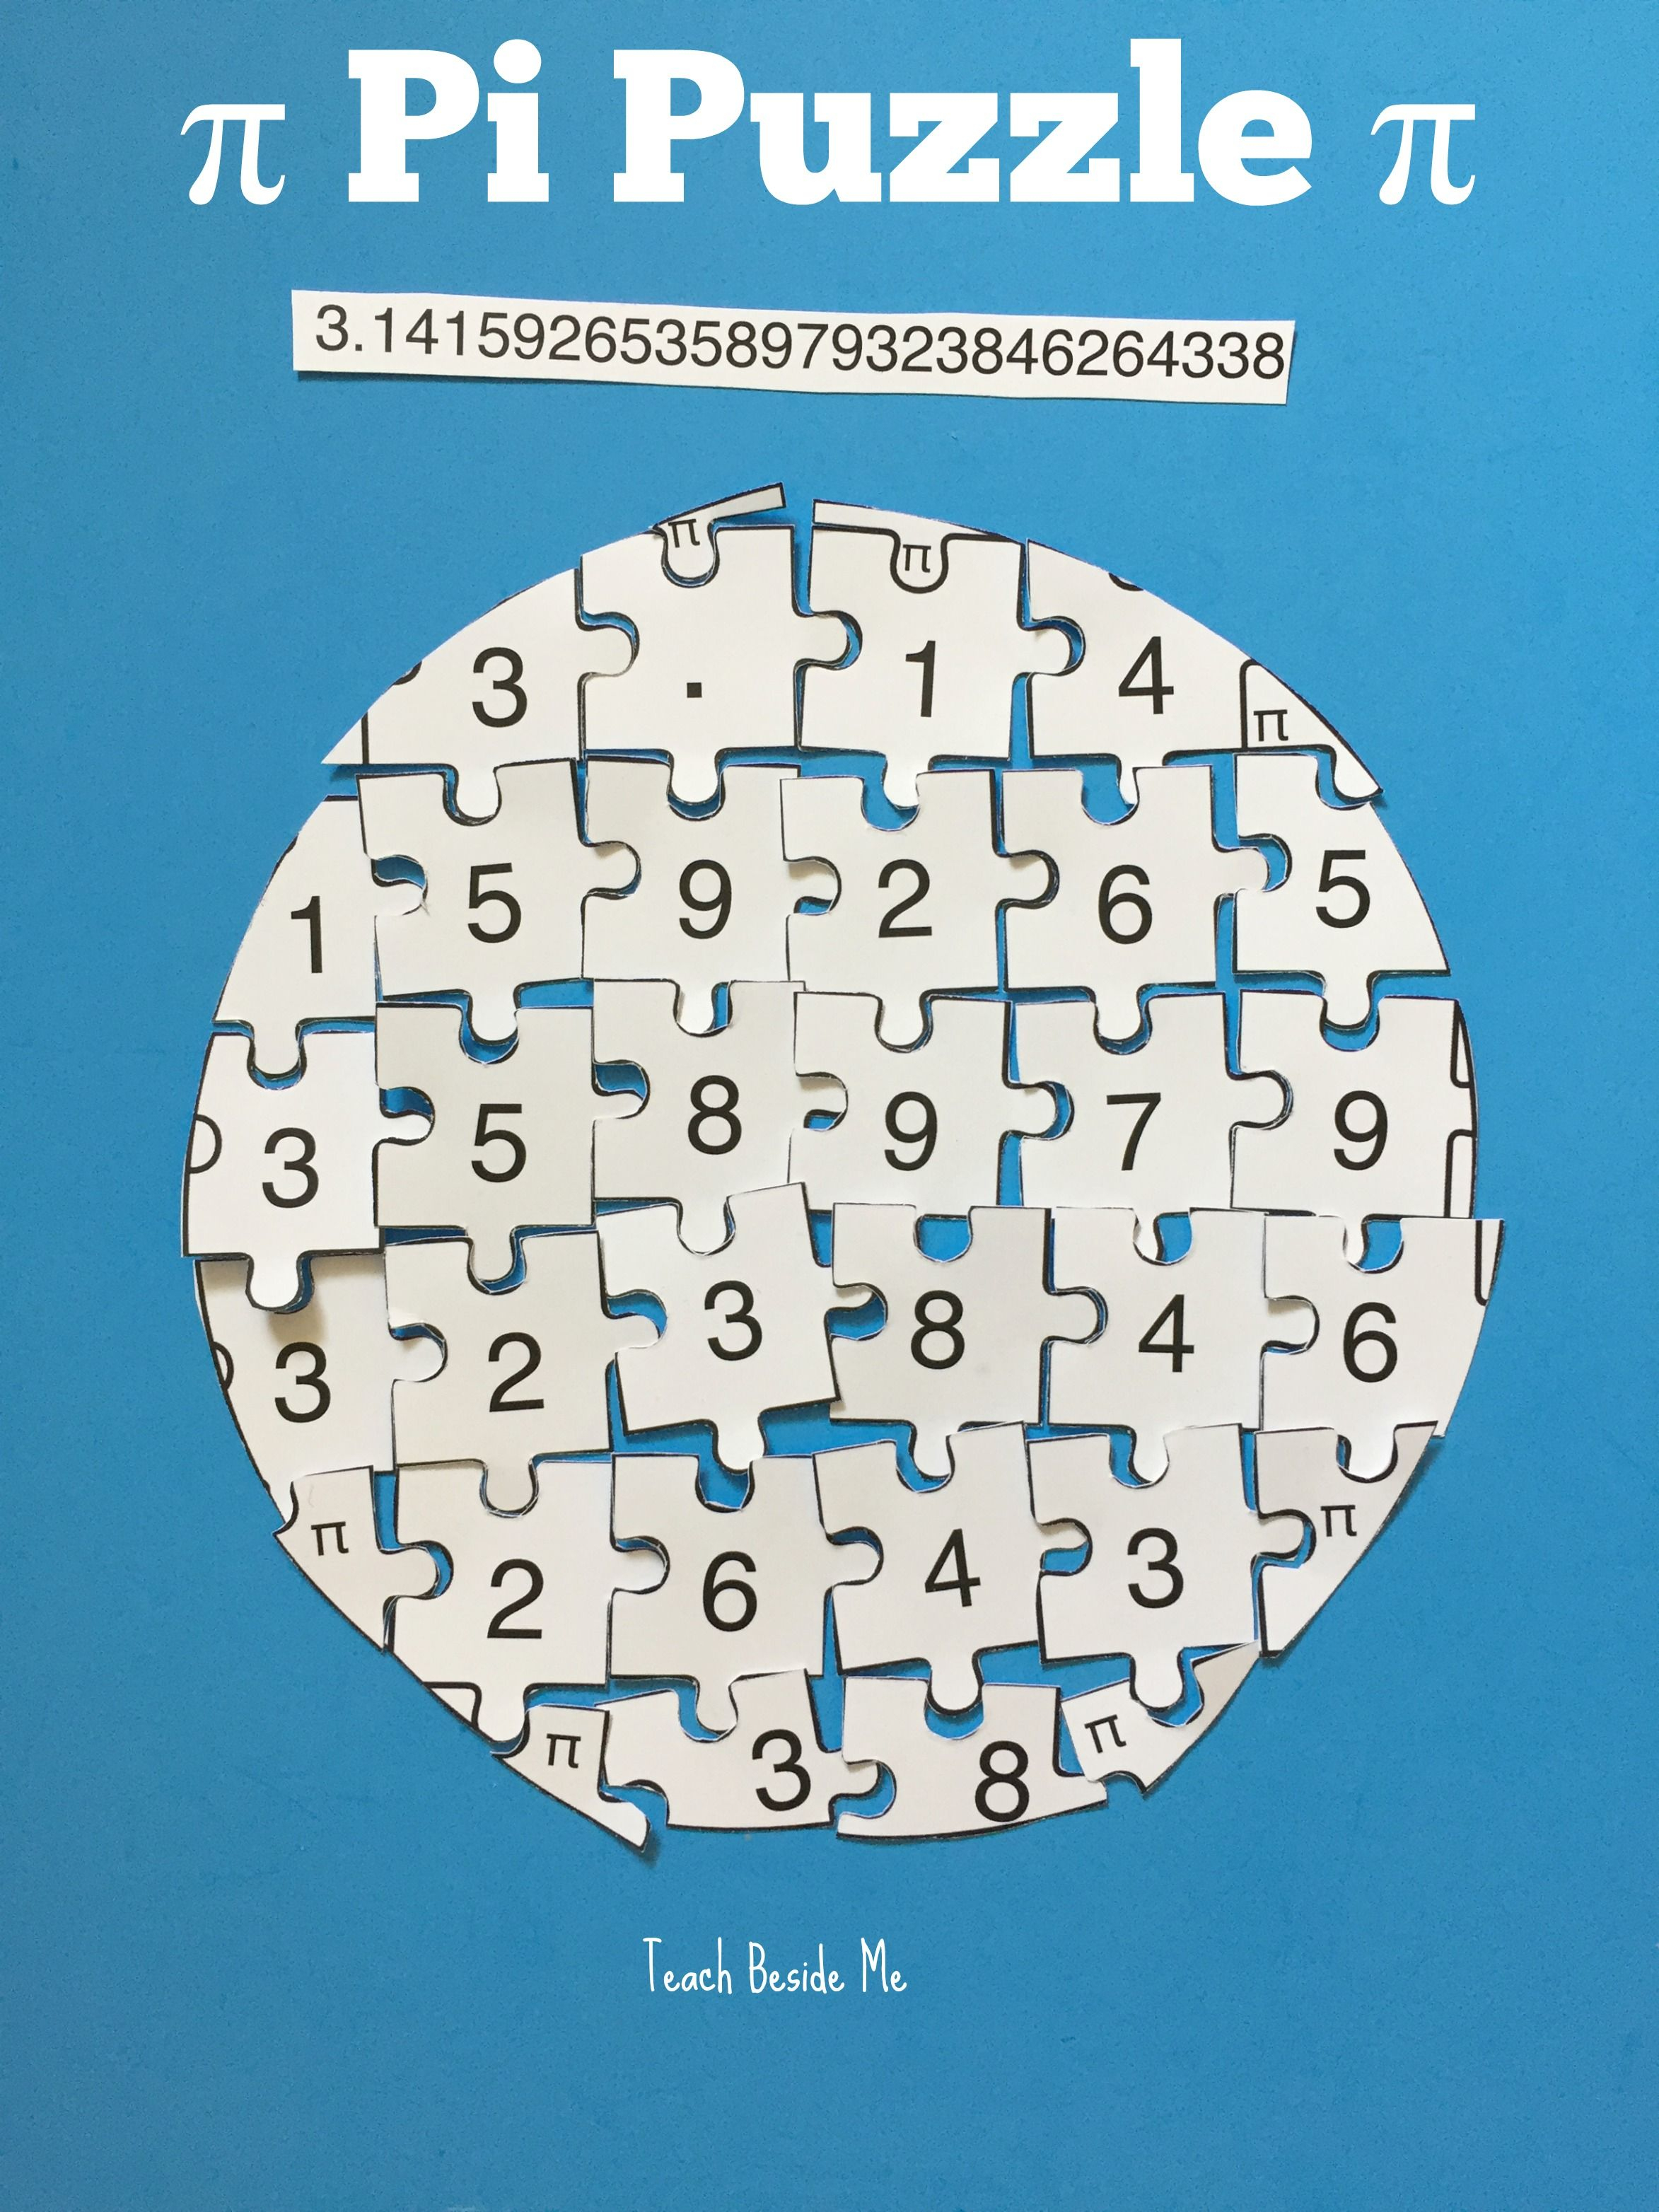 Printable Pi Puzzle For Pi Day | Teach Beside Me | Teaching Math - Printable Puzzle Of The Day